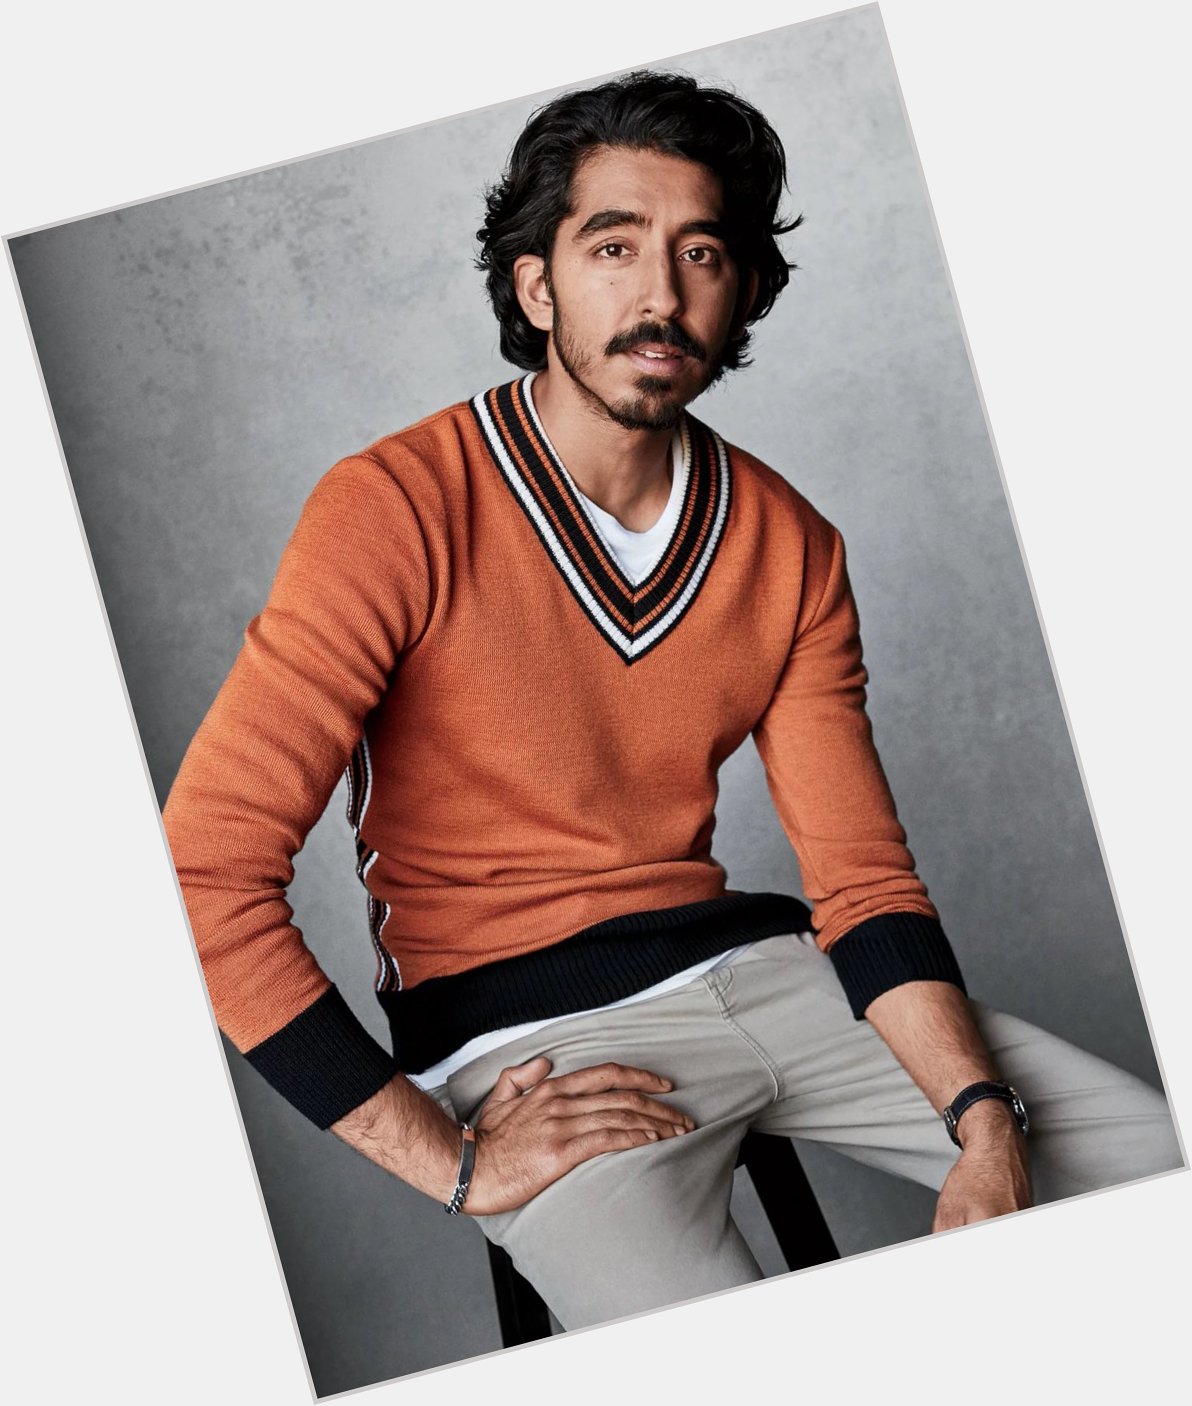 Happy birthday to the dreamiest of dreamboats, Dev Patel   